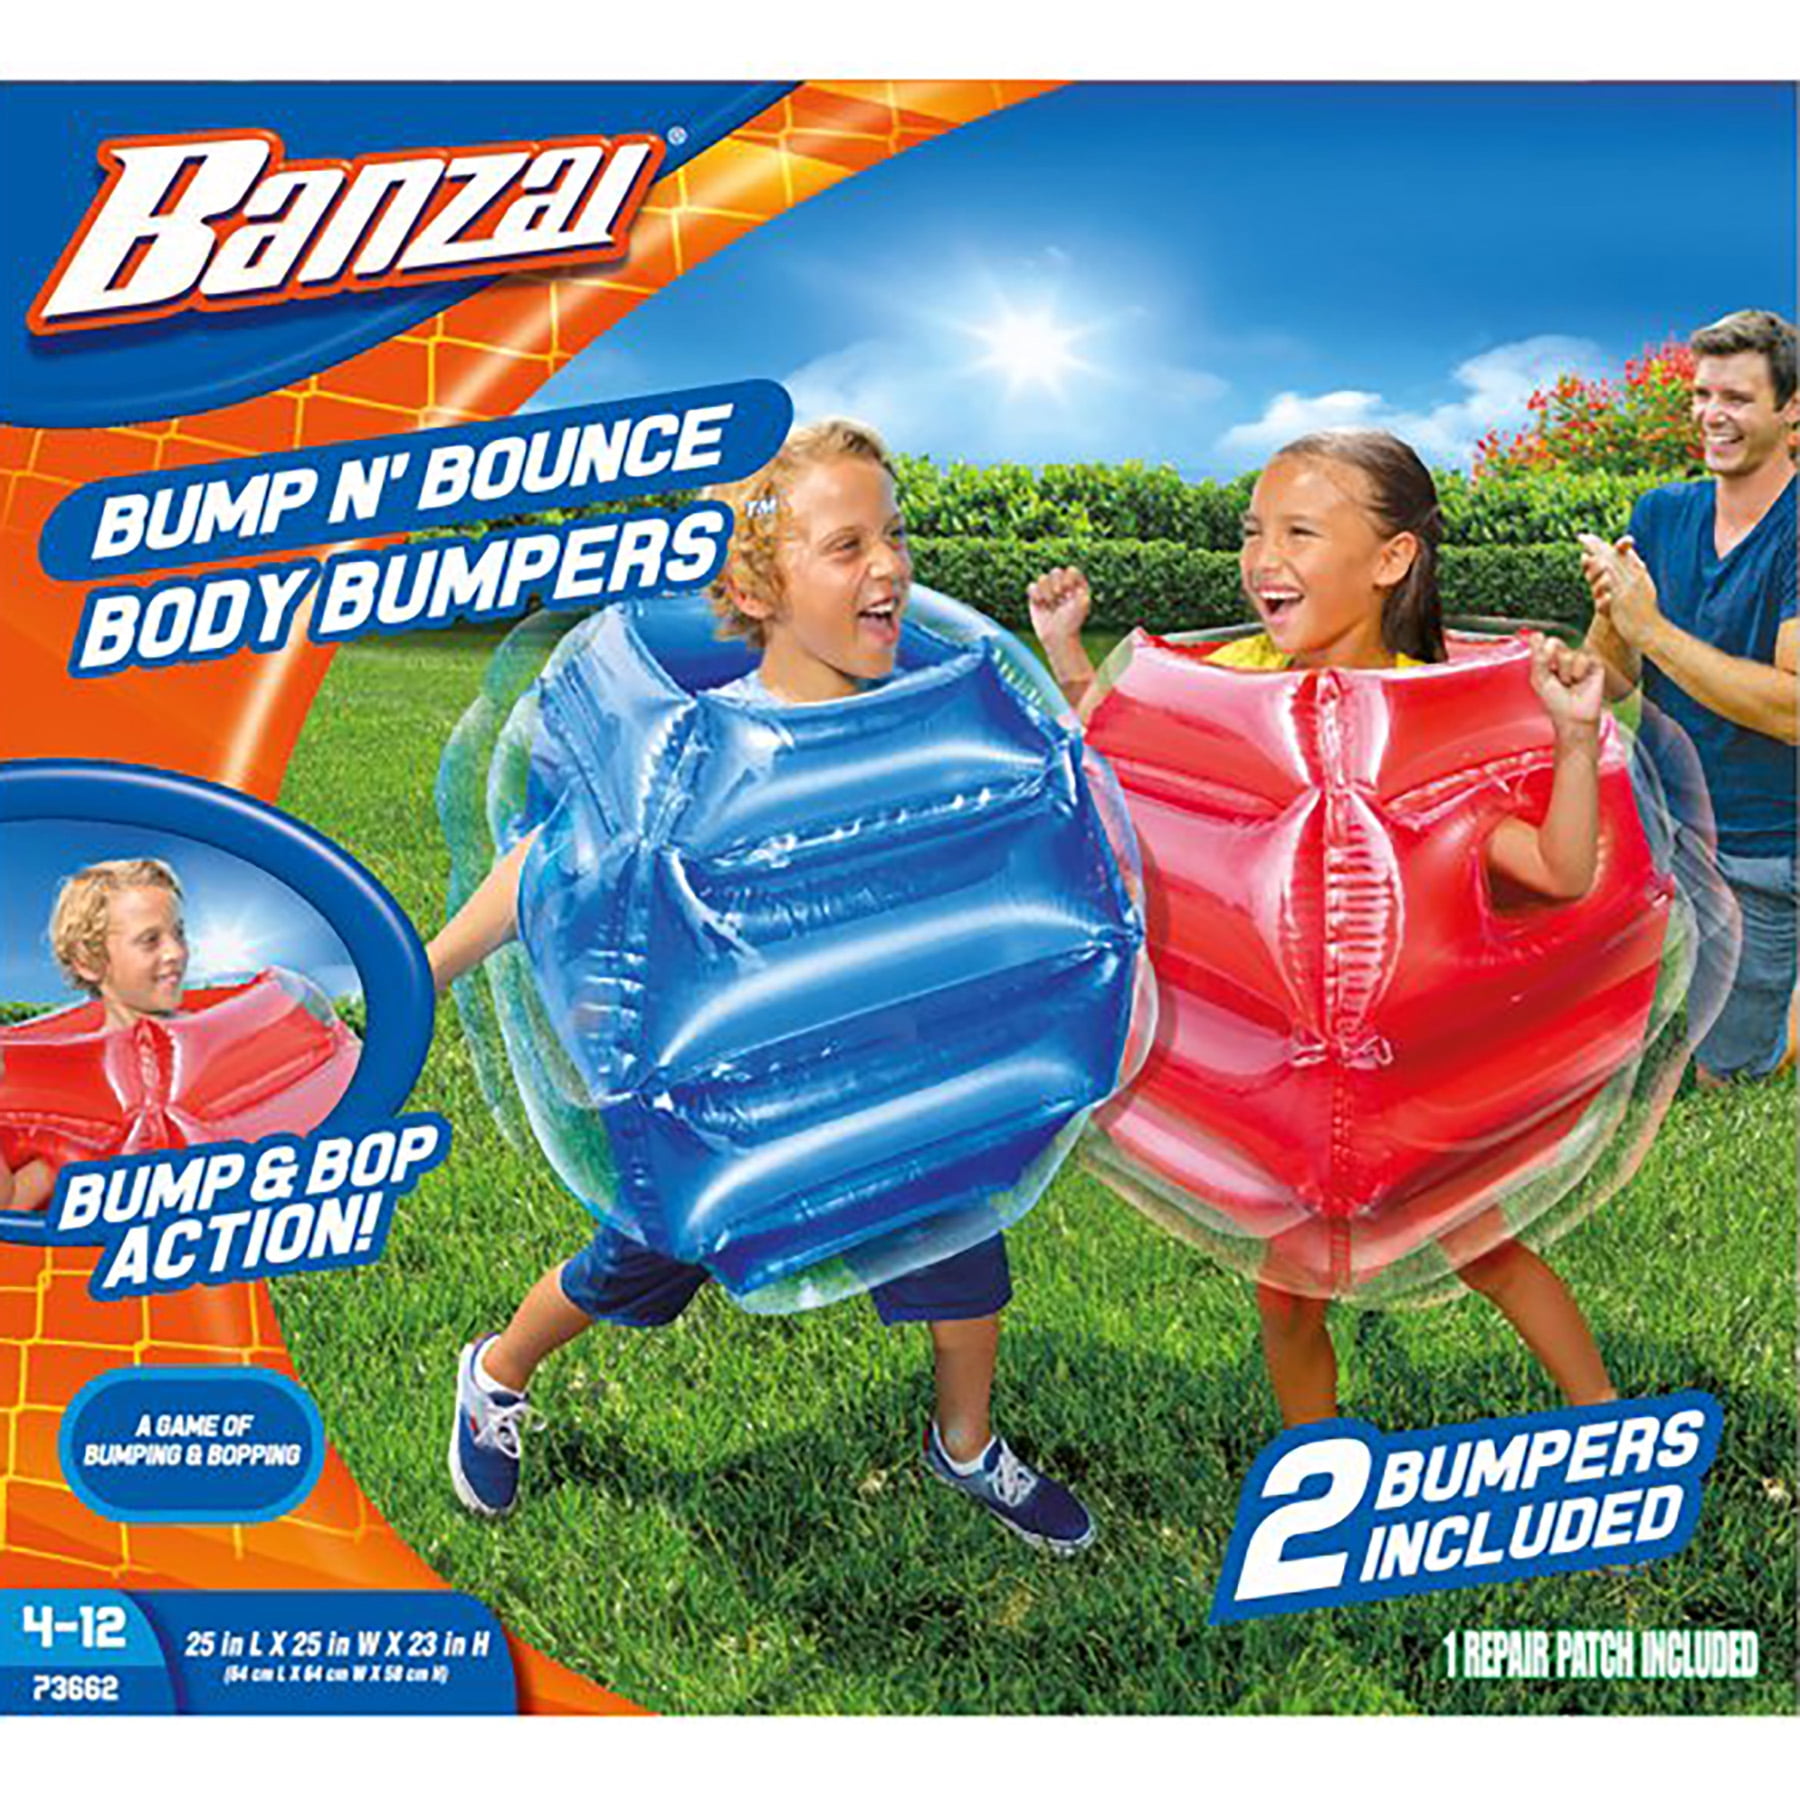 Banzai Bump N Bounce Body Bumper Inflatable Ages 4 Toy Play Fight Gift Game Fun 